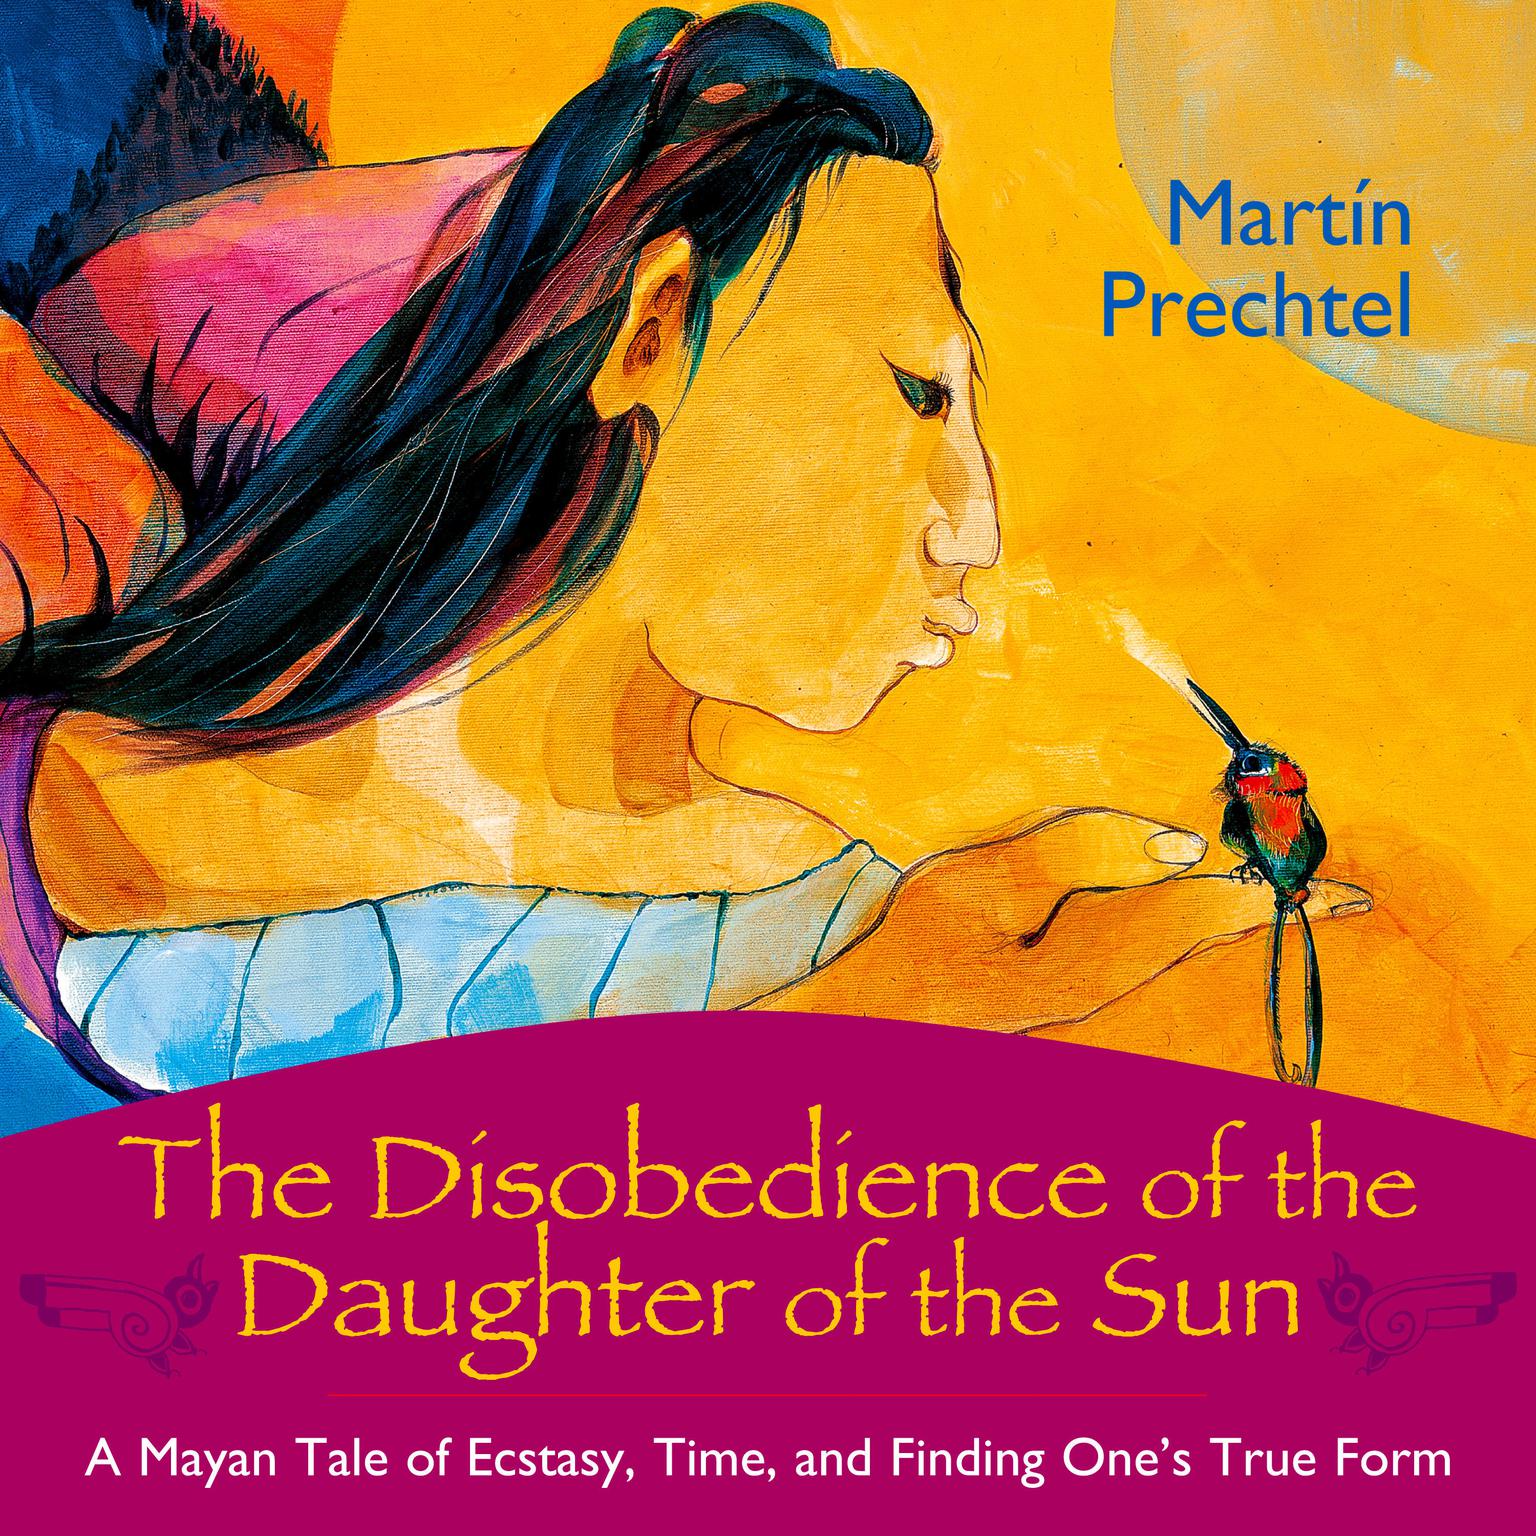 The Disobedience of the Daughter of the Sun: A Mayan Tale of Ecstasy, Time, and Finding Ones True Form Audiobook, by Martín Prechtel